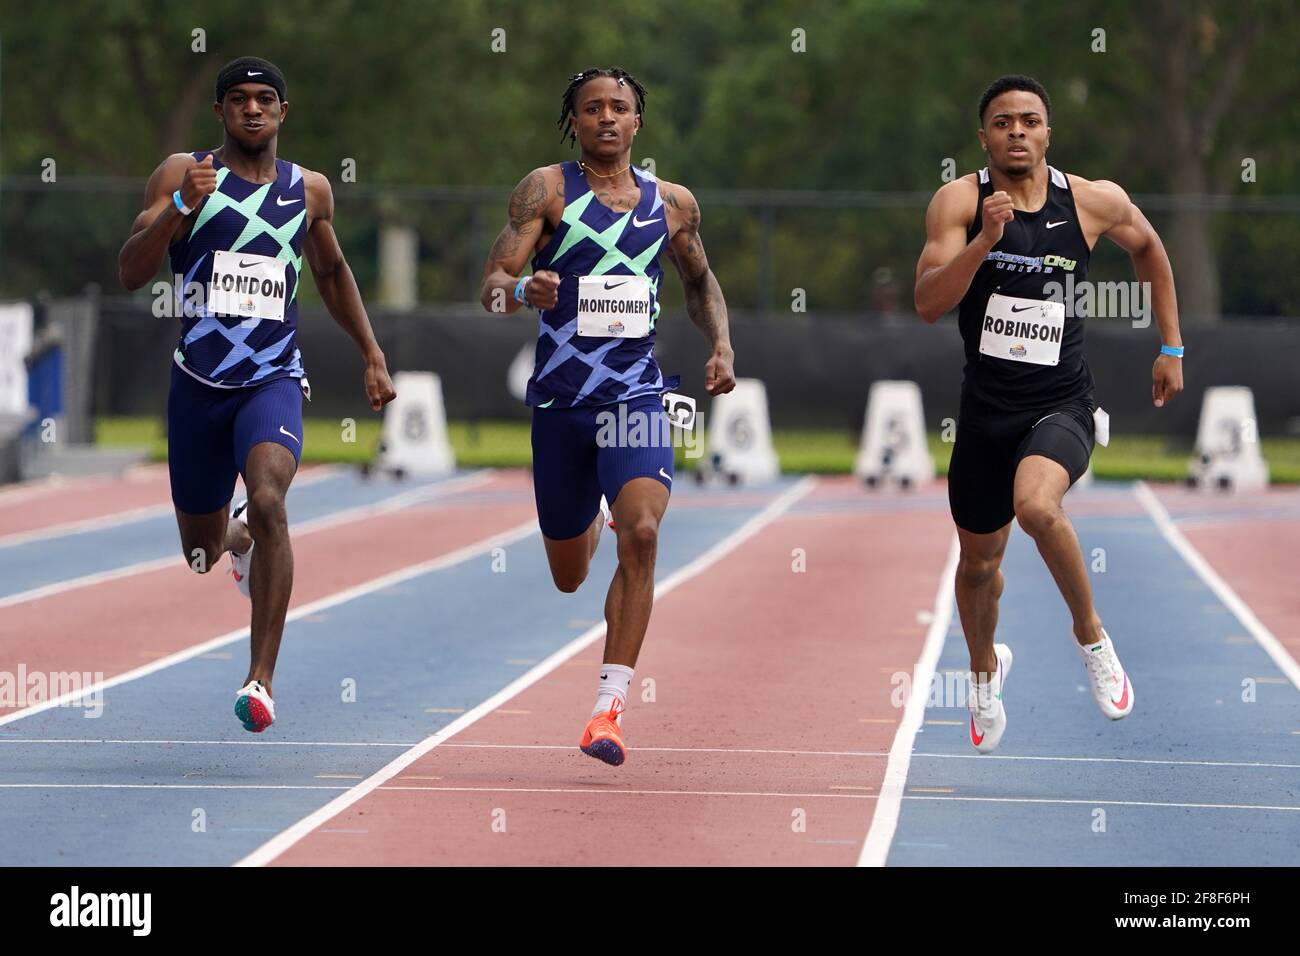 Justin Robinson (USA), right, defeats Wil London (USA), left, and Kahmari Montgomery (USA) to win the 400m in 45.23 during the Miramar Invitational, S Stock Photo